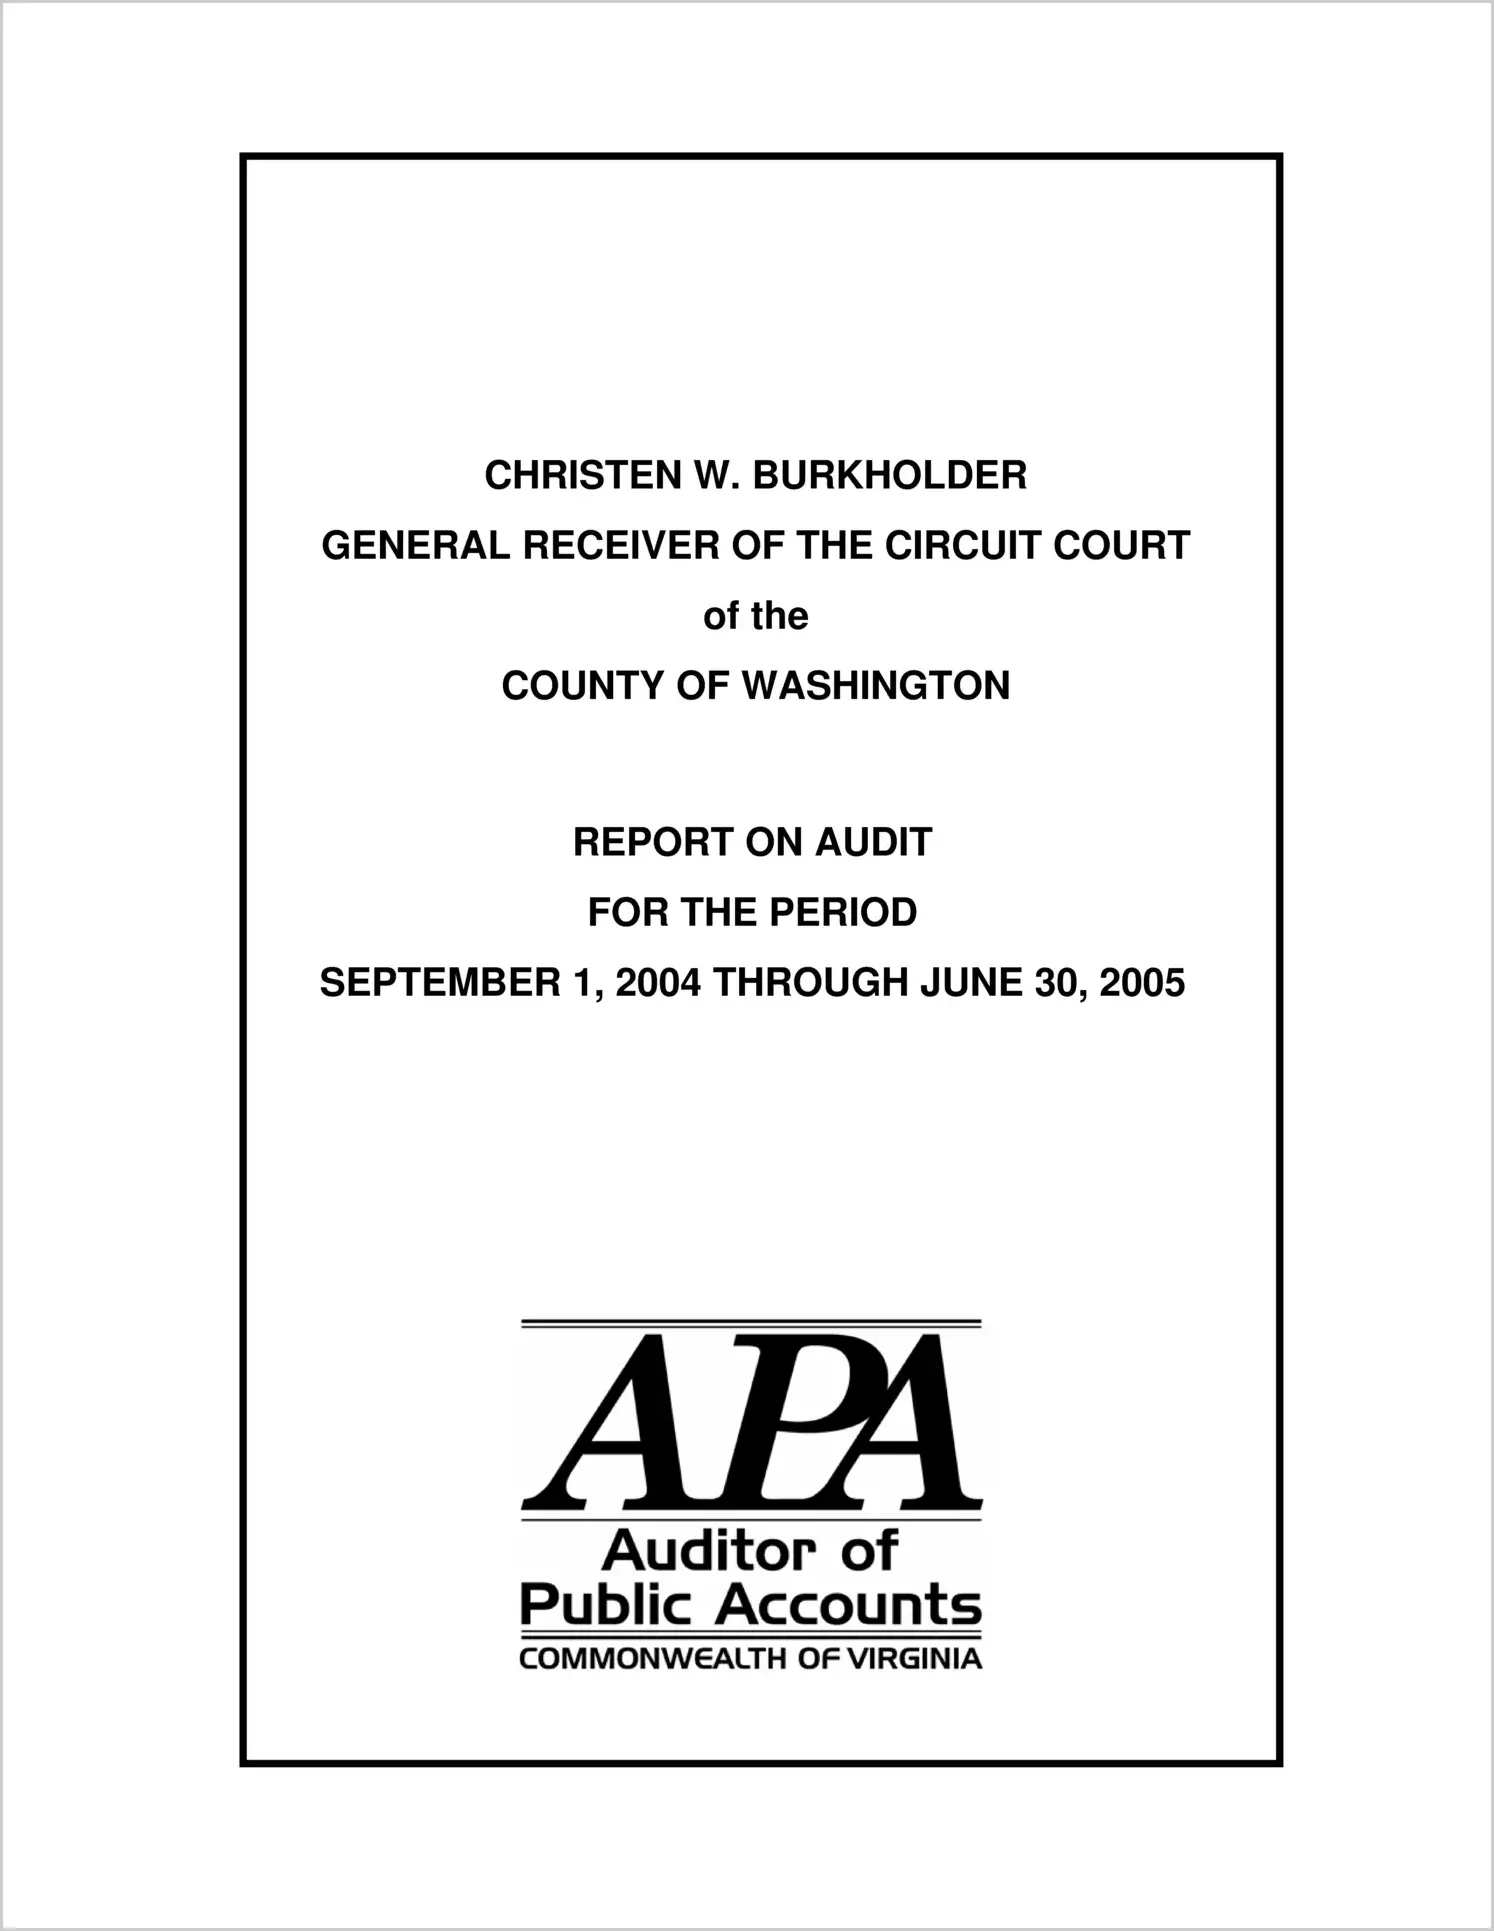 General Receiver of the Circuit Court of the County of Washington for the period September 1, 2004 through June 30, 2005